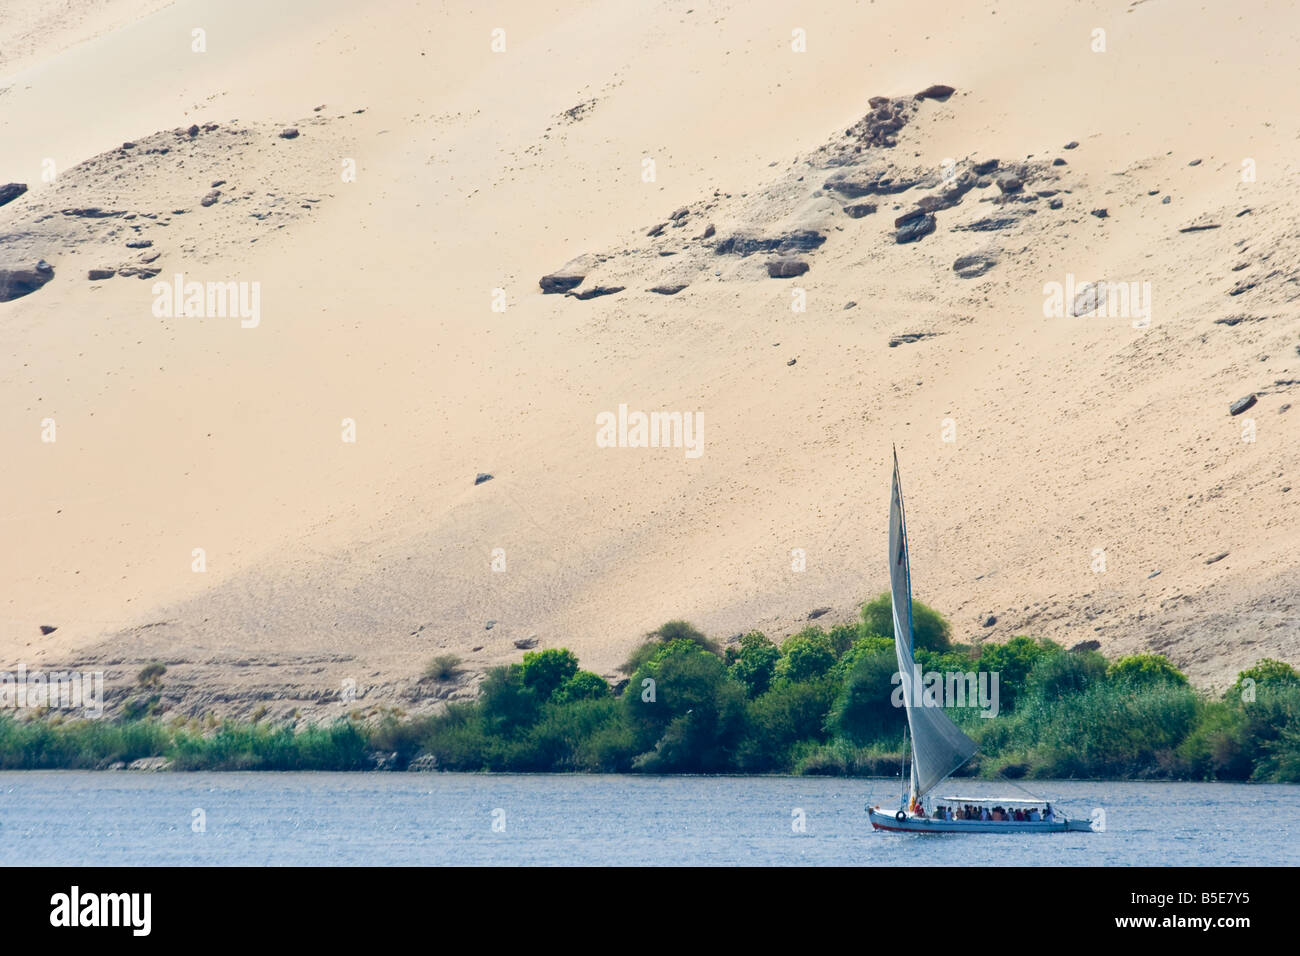 Felucca Sailboat in the Nile River at Aswan Egypt Stock Photo